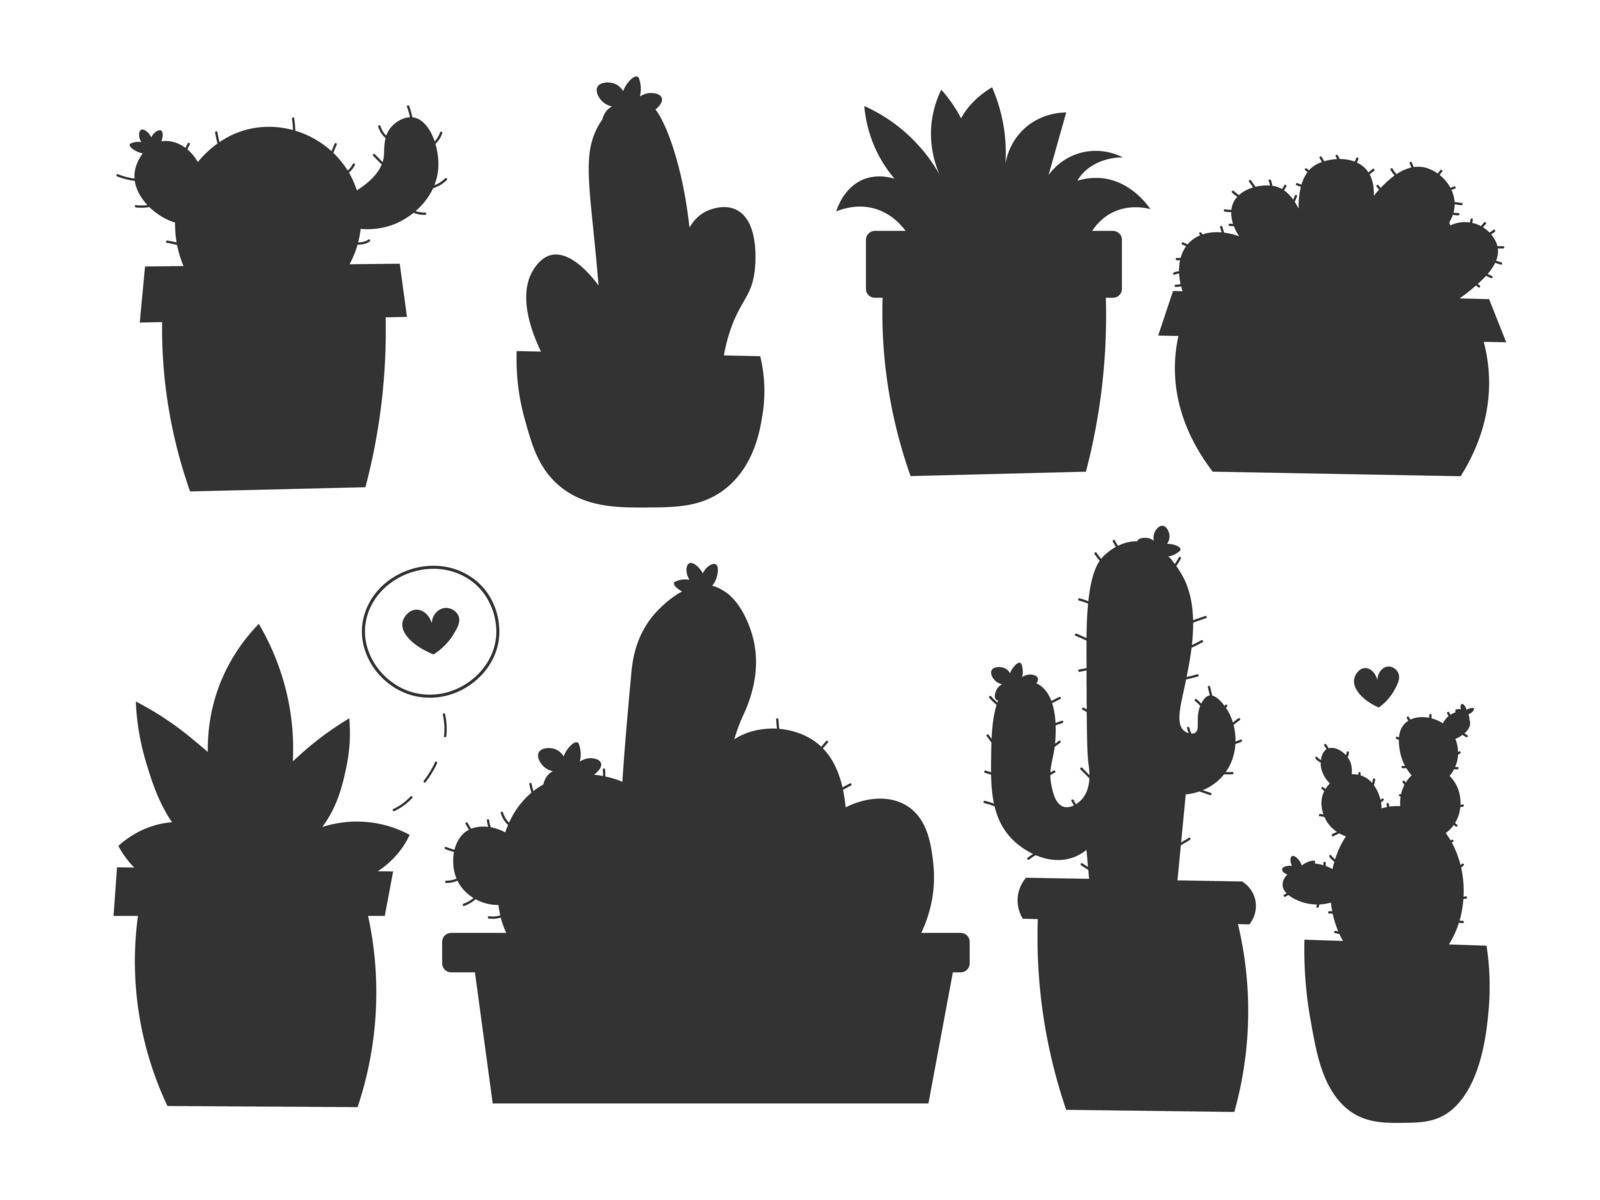 Vector collection of black hand drawn cactus sketch in pot collection isolated on white background. Flat cactus icon set. Nature elements illustration.